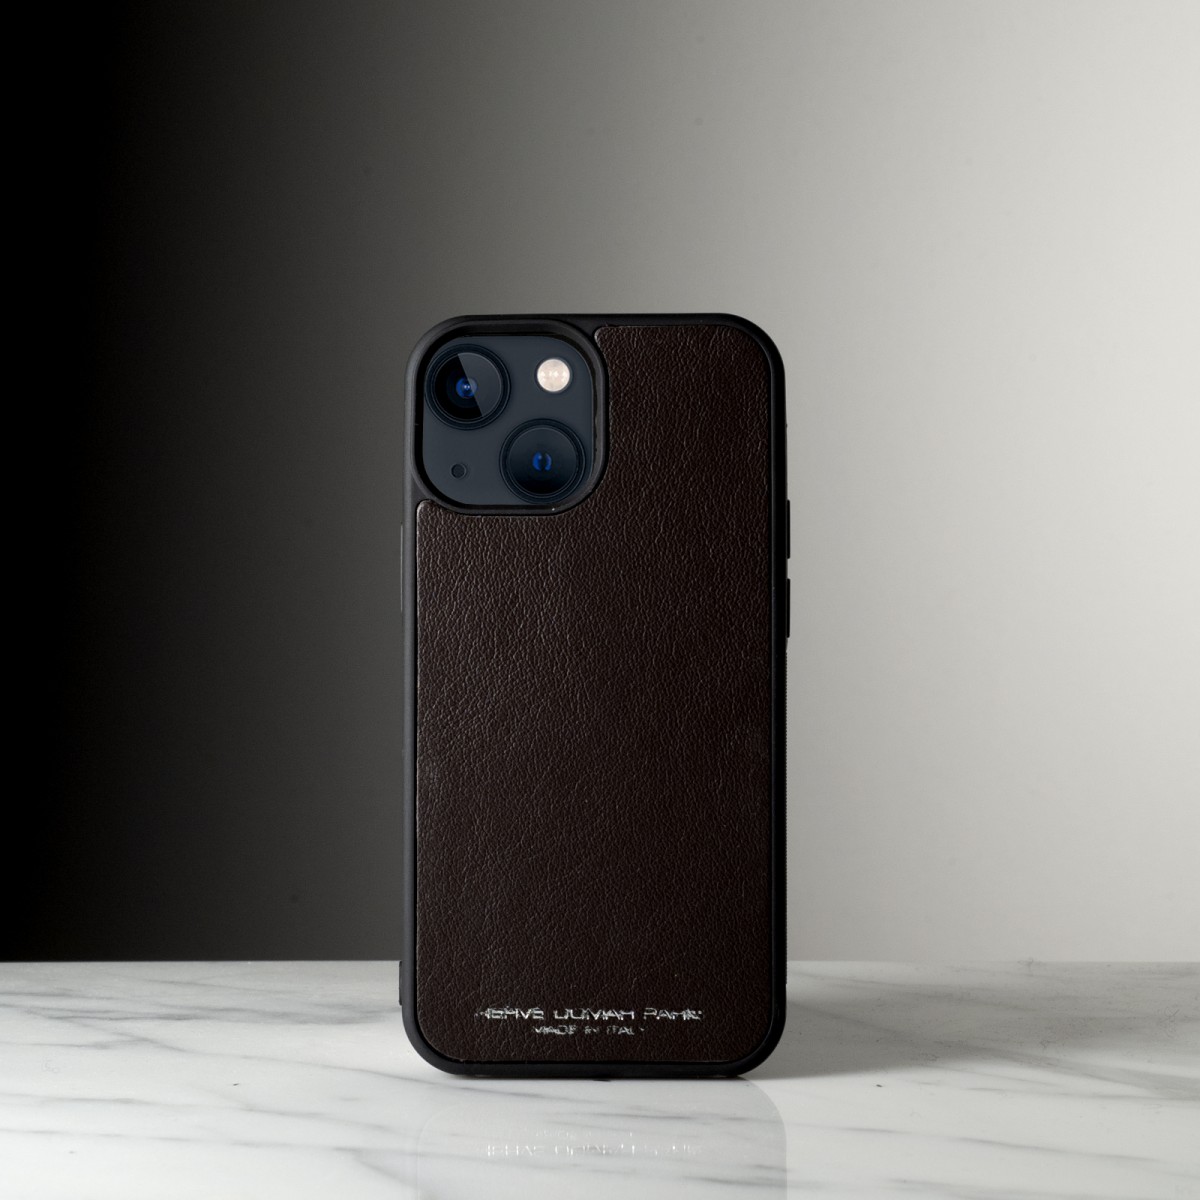 IPHONE 13 MINI CASE - Handcrafted leather iPhone case made in Italy